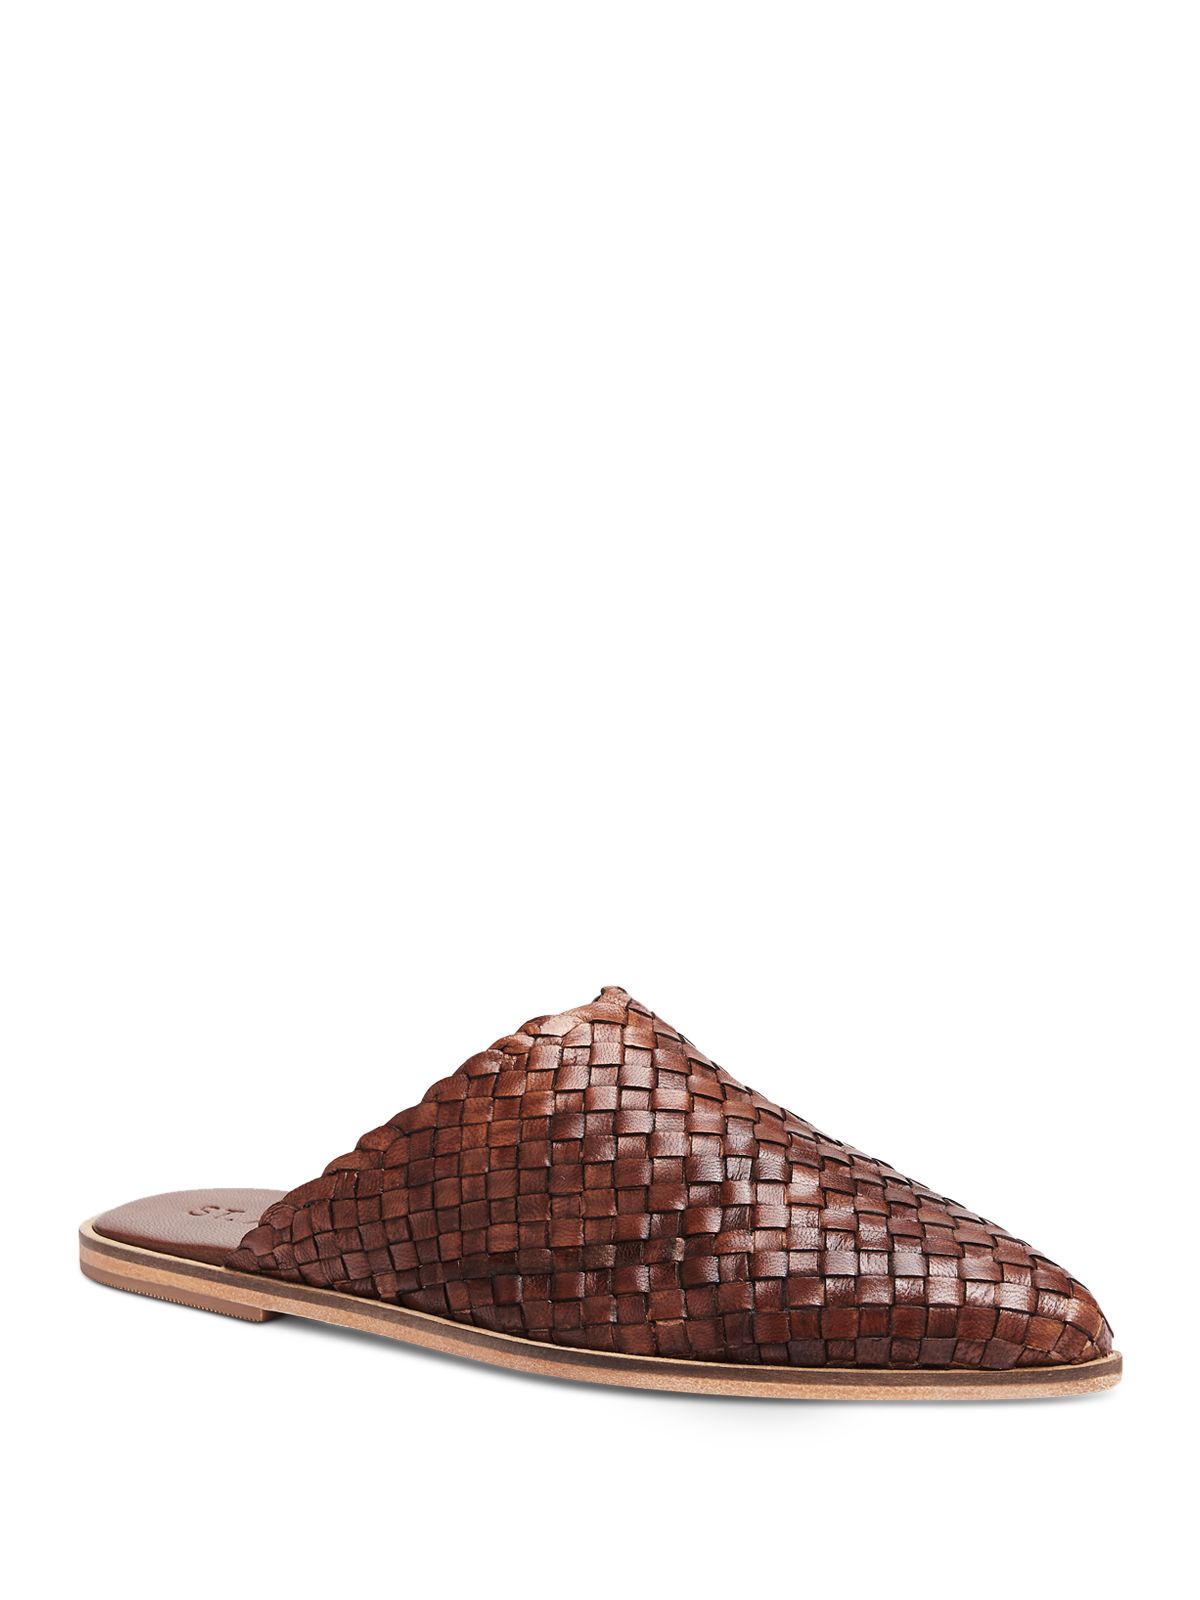 ST. AGNI Womens Brown Woven Caio Pointed Toe Slip On Leather Mules 36